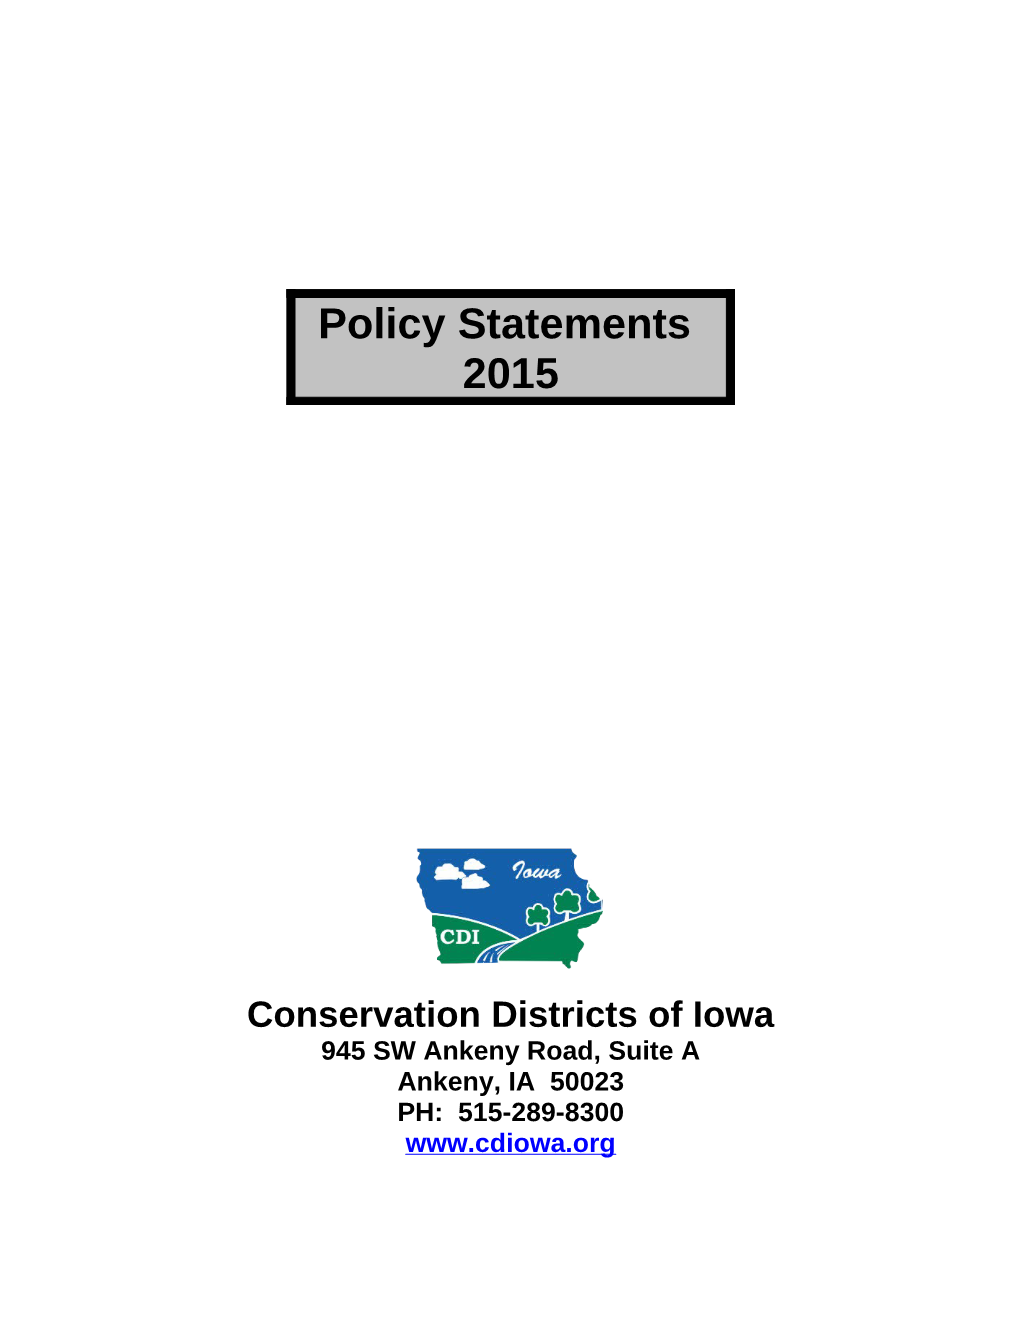 Association Policy Statements